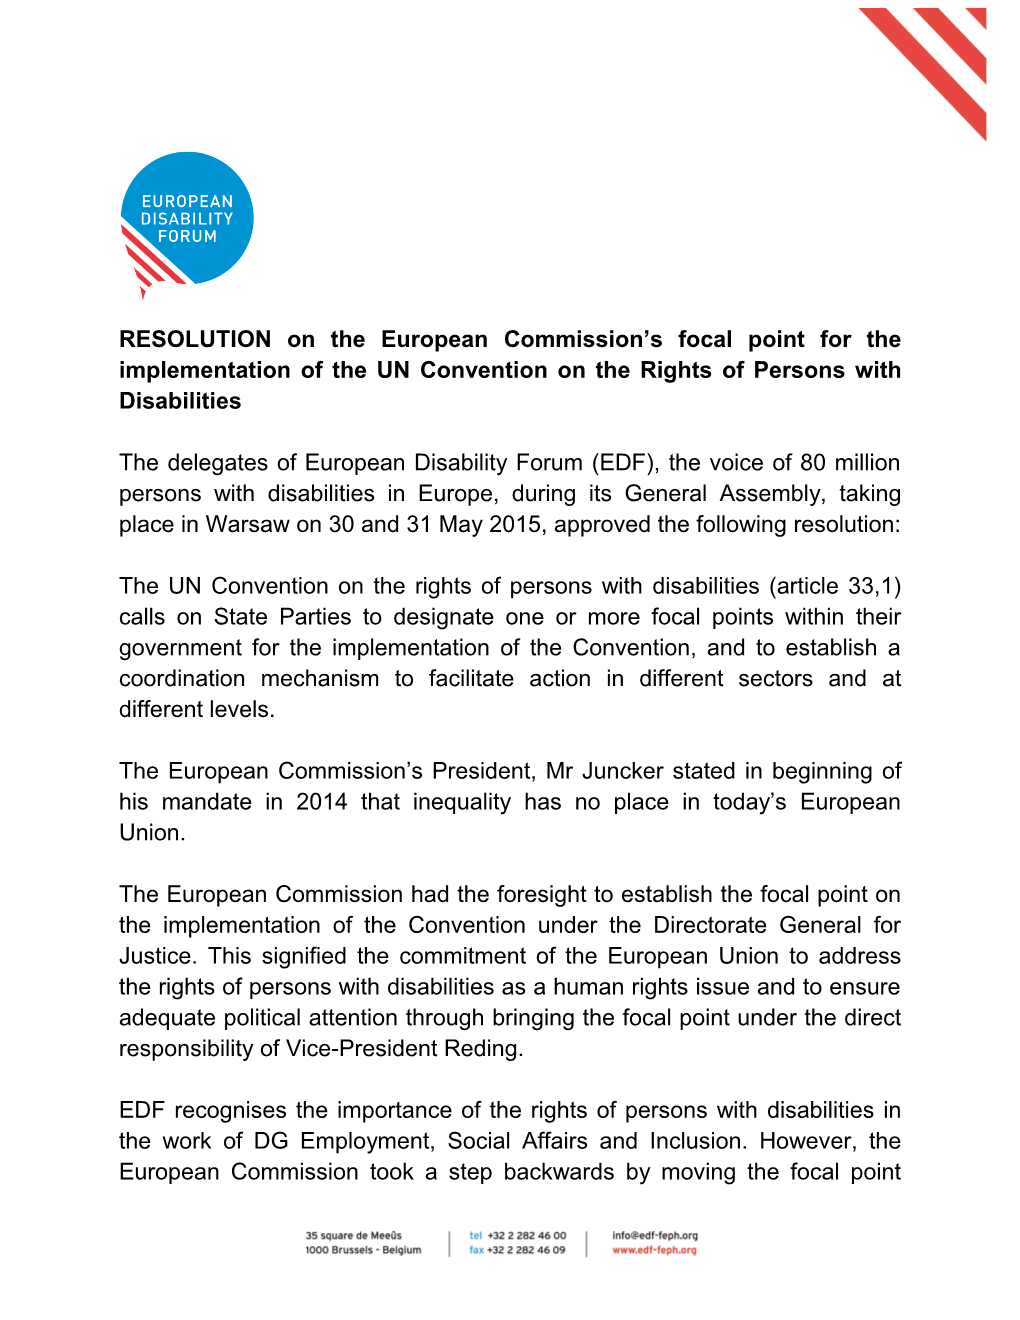 RESOLUTION on the European Commission S Focal Point for the Implementation of the UN Convention